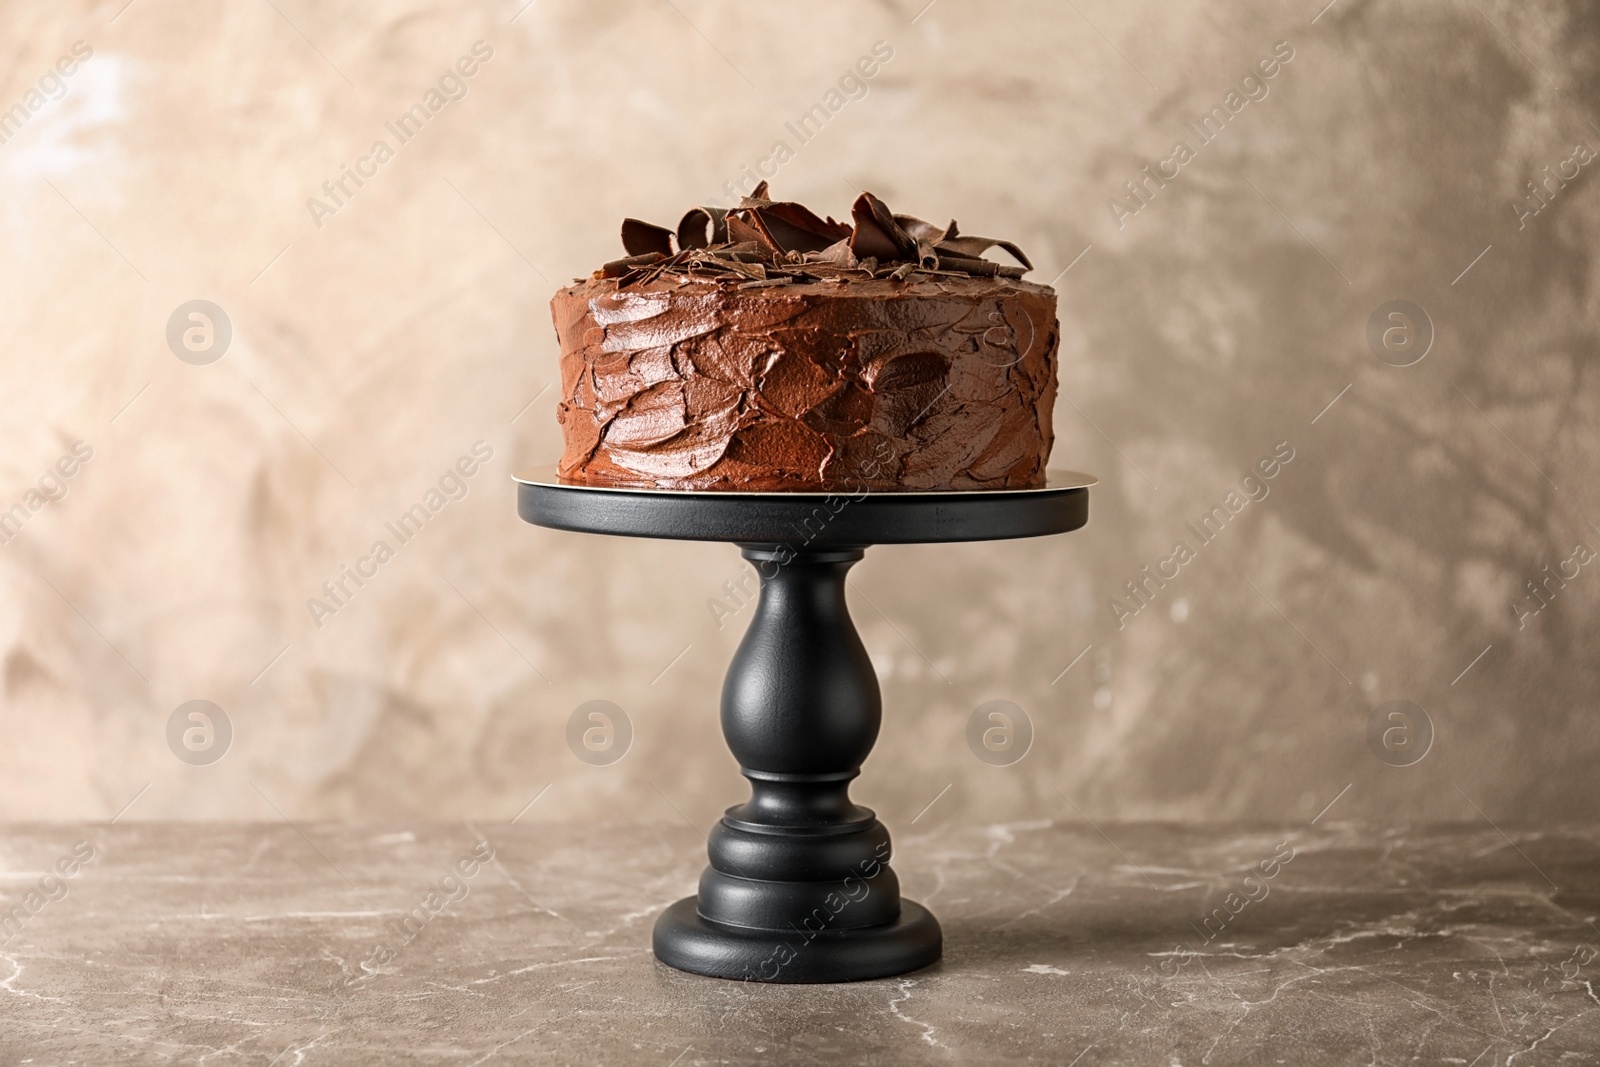 Photo of Stand with tasty homemade chocolate cake on table